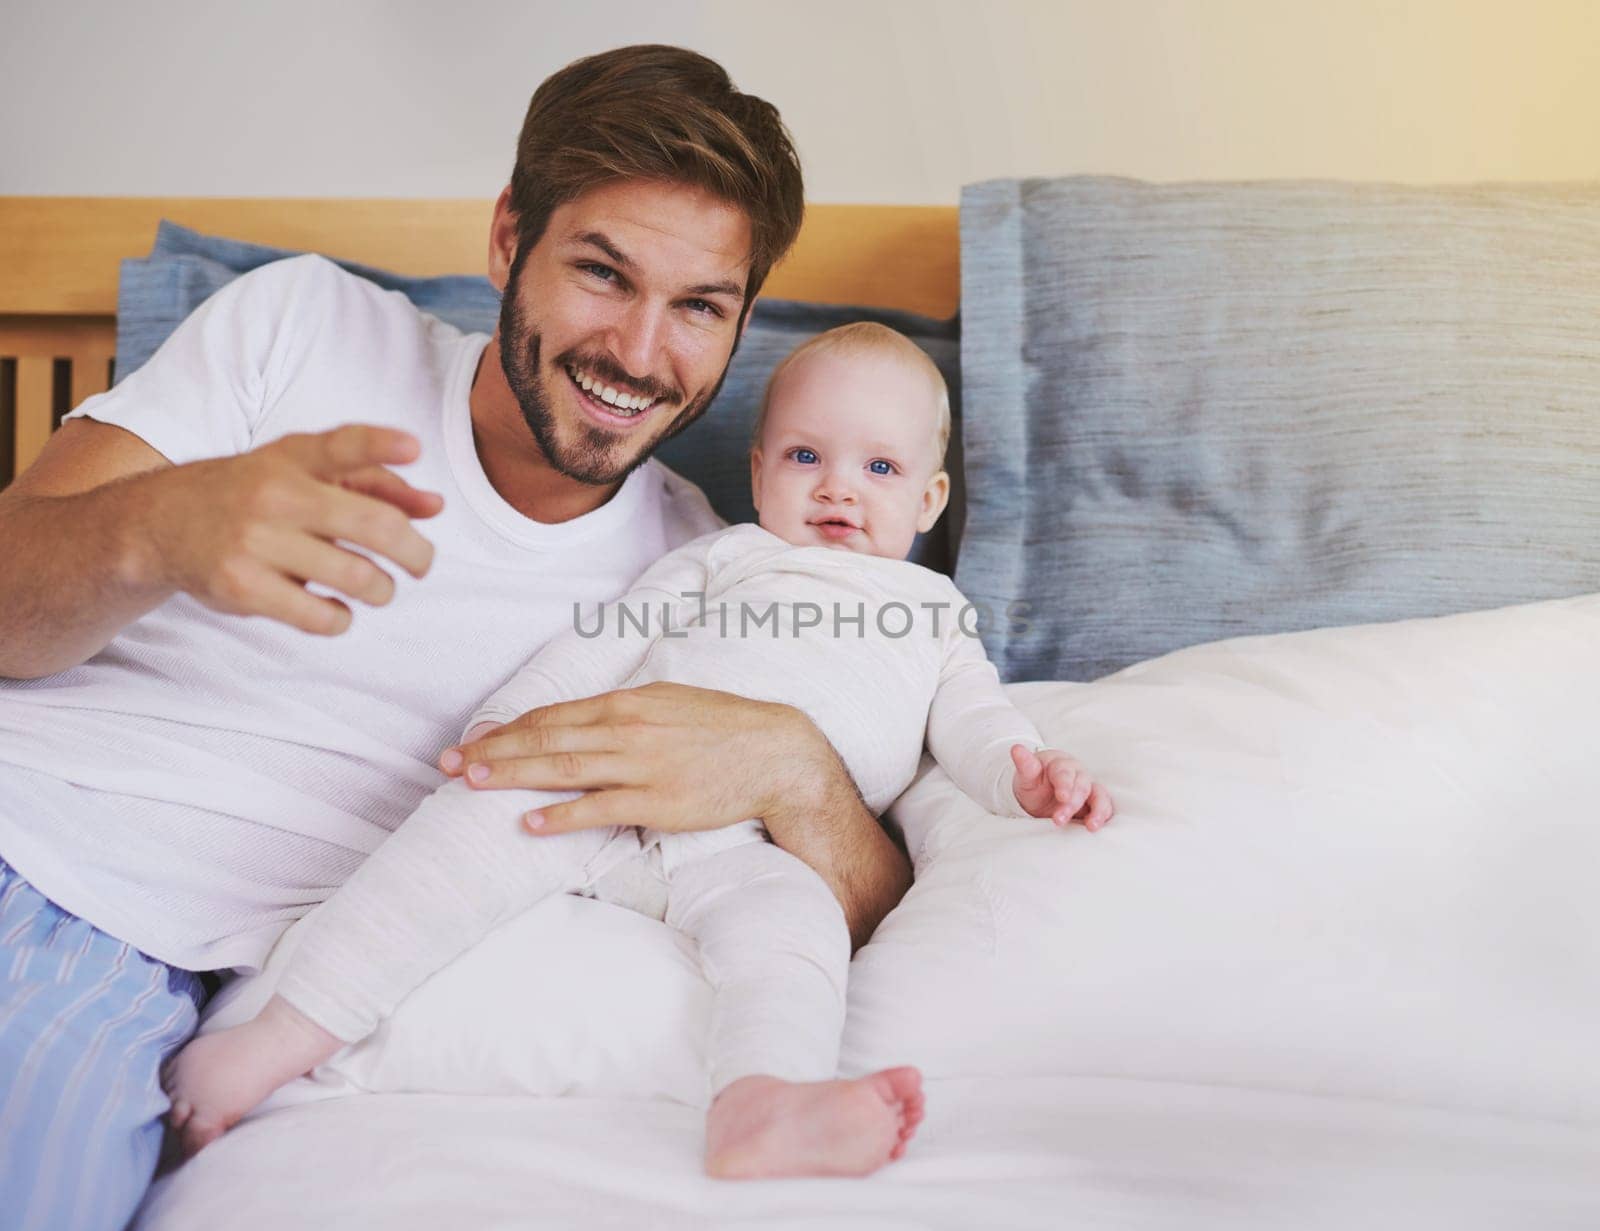 Family, bedroom and portrait of father with baby for bonding, relationship and love for parenting. Happy, home and dad relax with newborn infant for child development, support and care in house by YuriArcurs